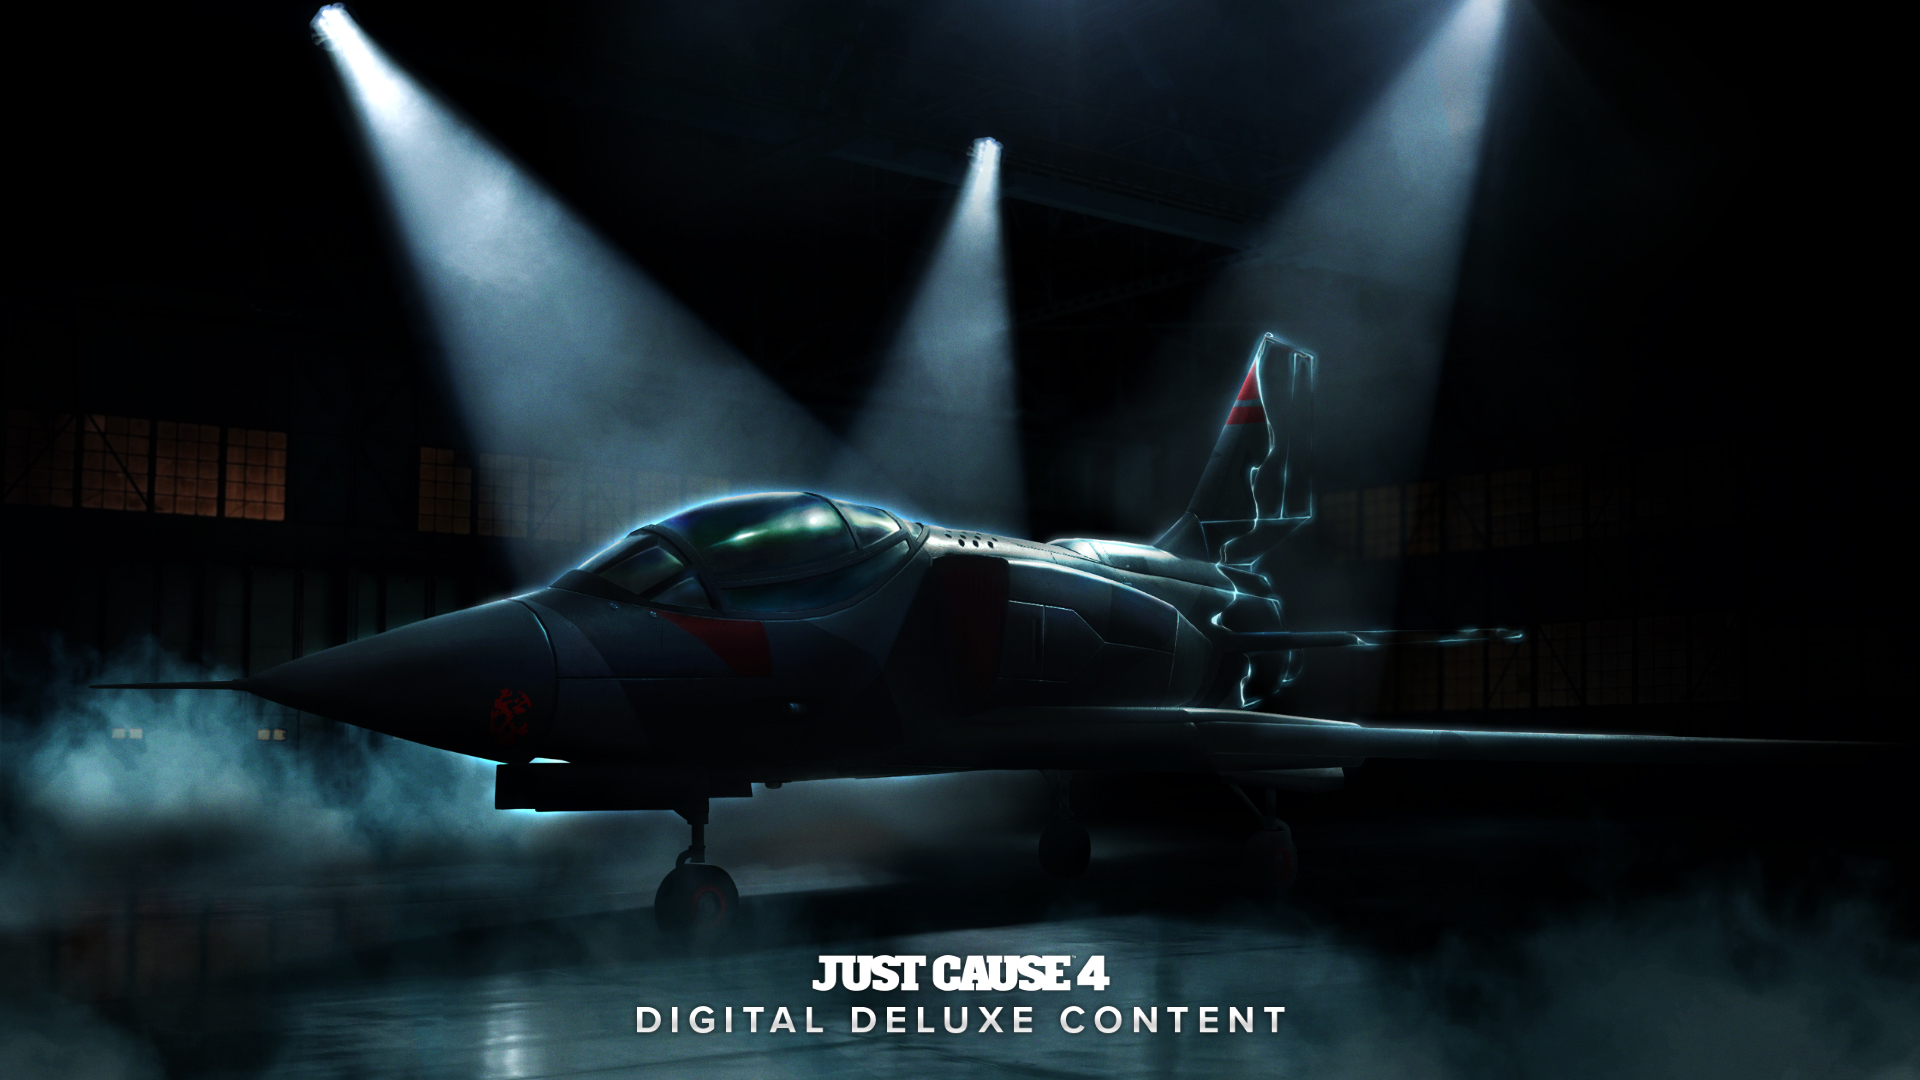 Just Cause™ 4: Digital Deluxe Content Featured Screenshot #1